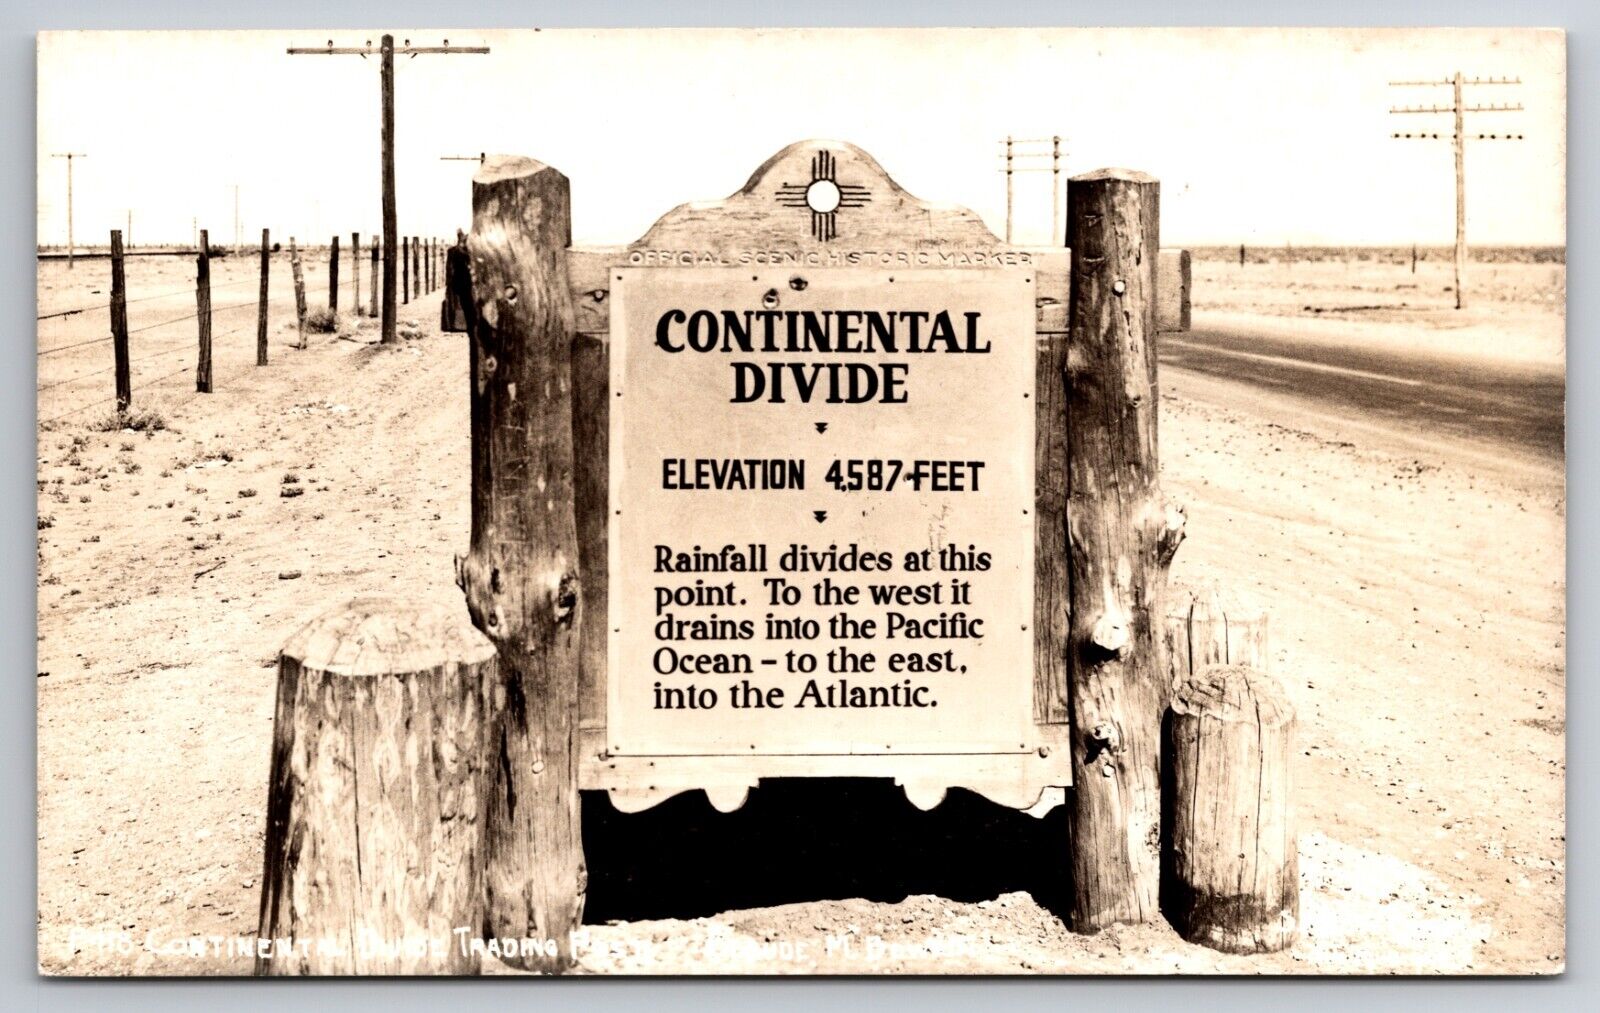 Continental Divide Marker Gage Deming Lordsburg New Mexico 1947 Real Photo RPPC